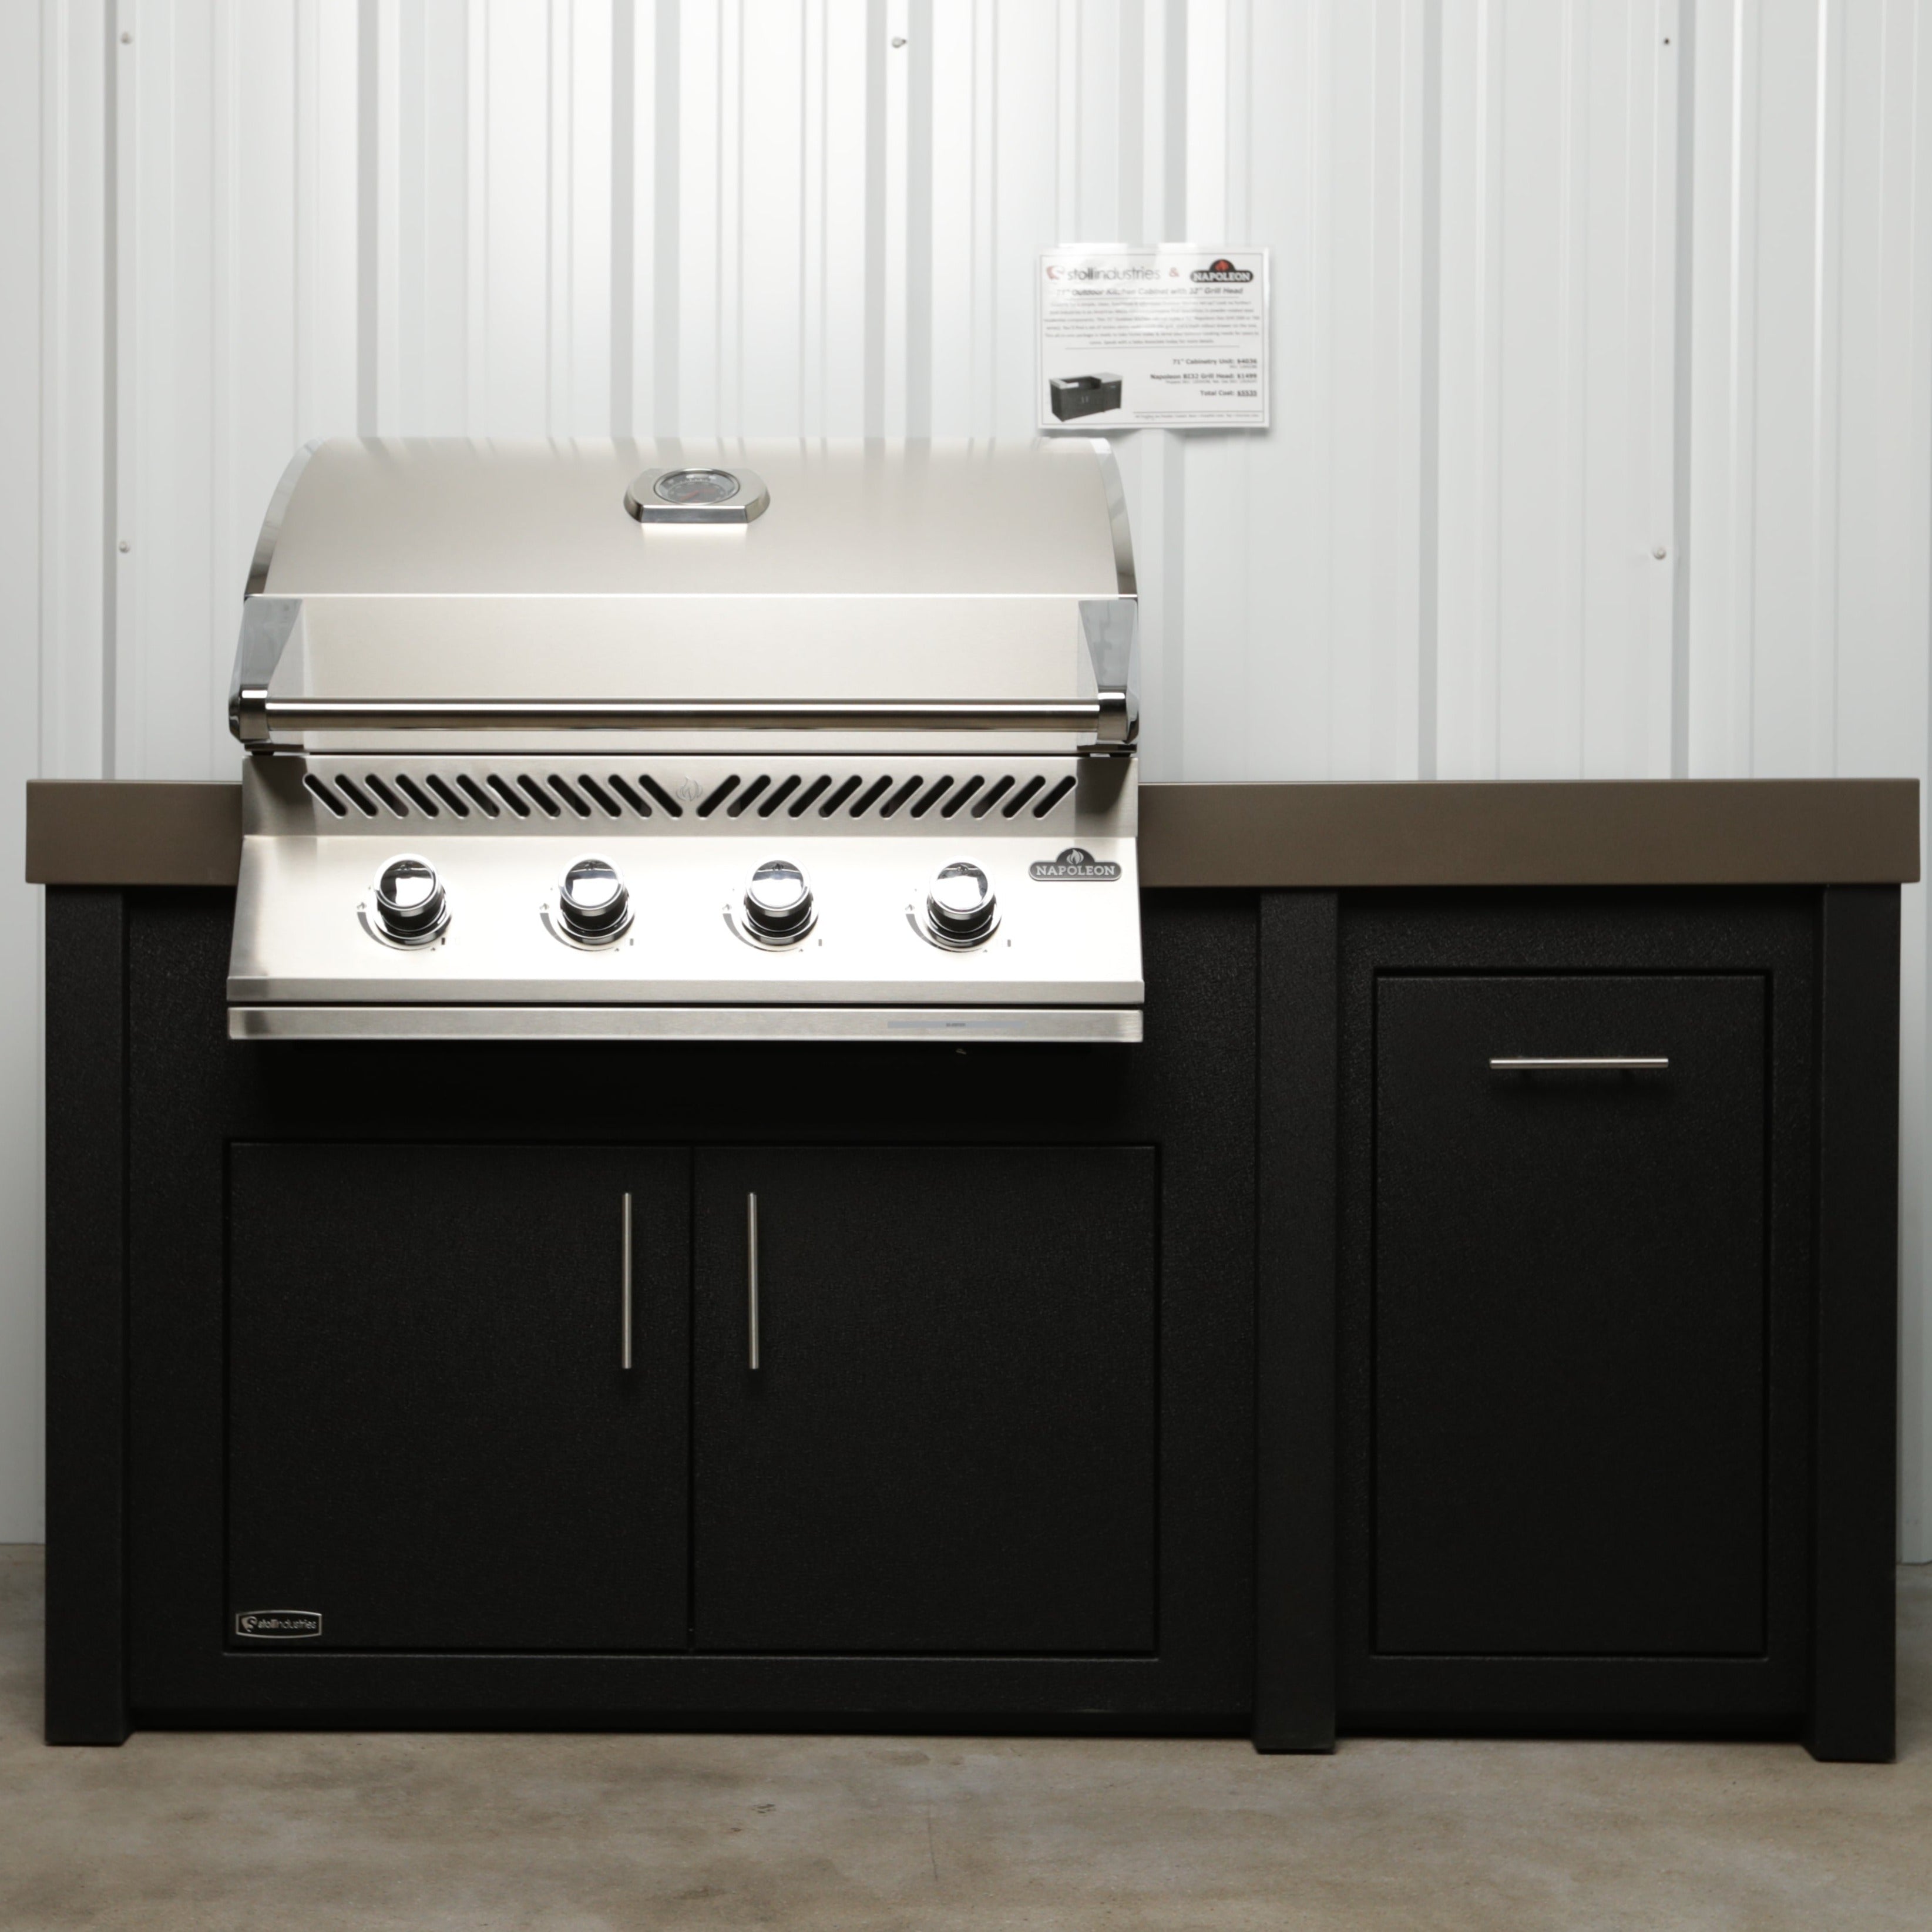 Local Special, Stoll 71" Outdoor Kitchen Cabinet Display with Napoleon BI32, Propane Grill 12044498